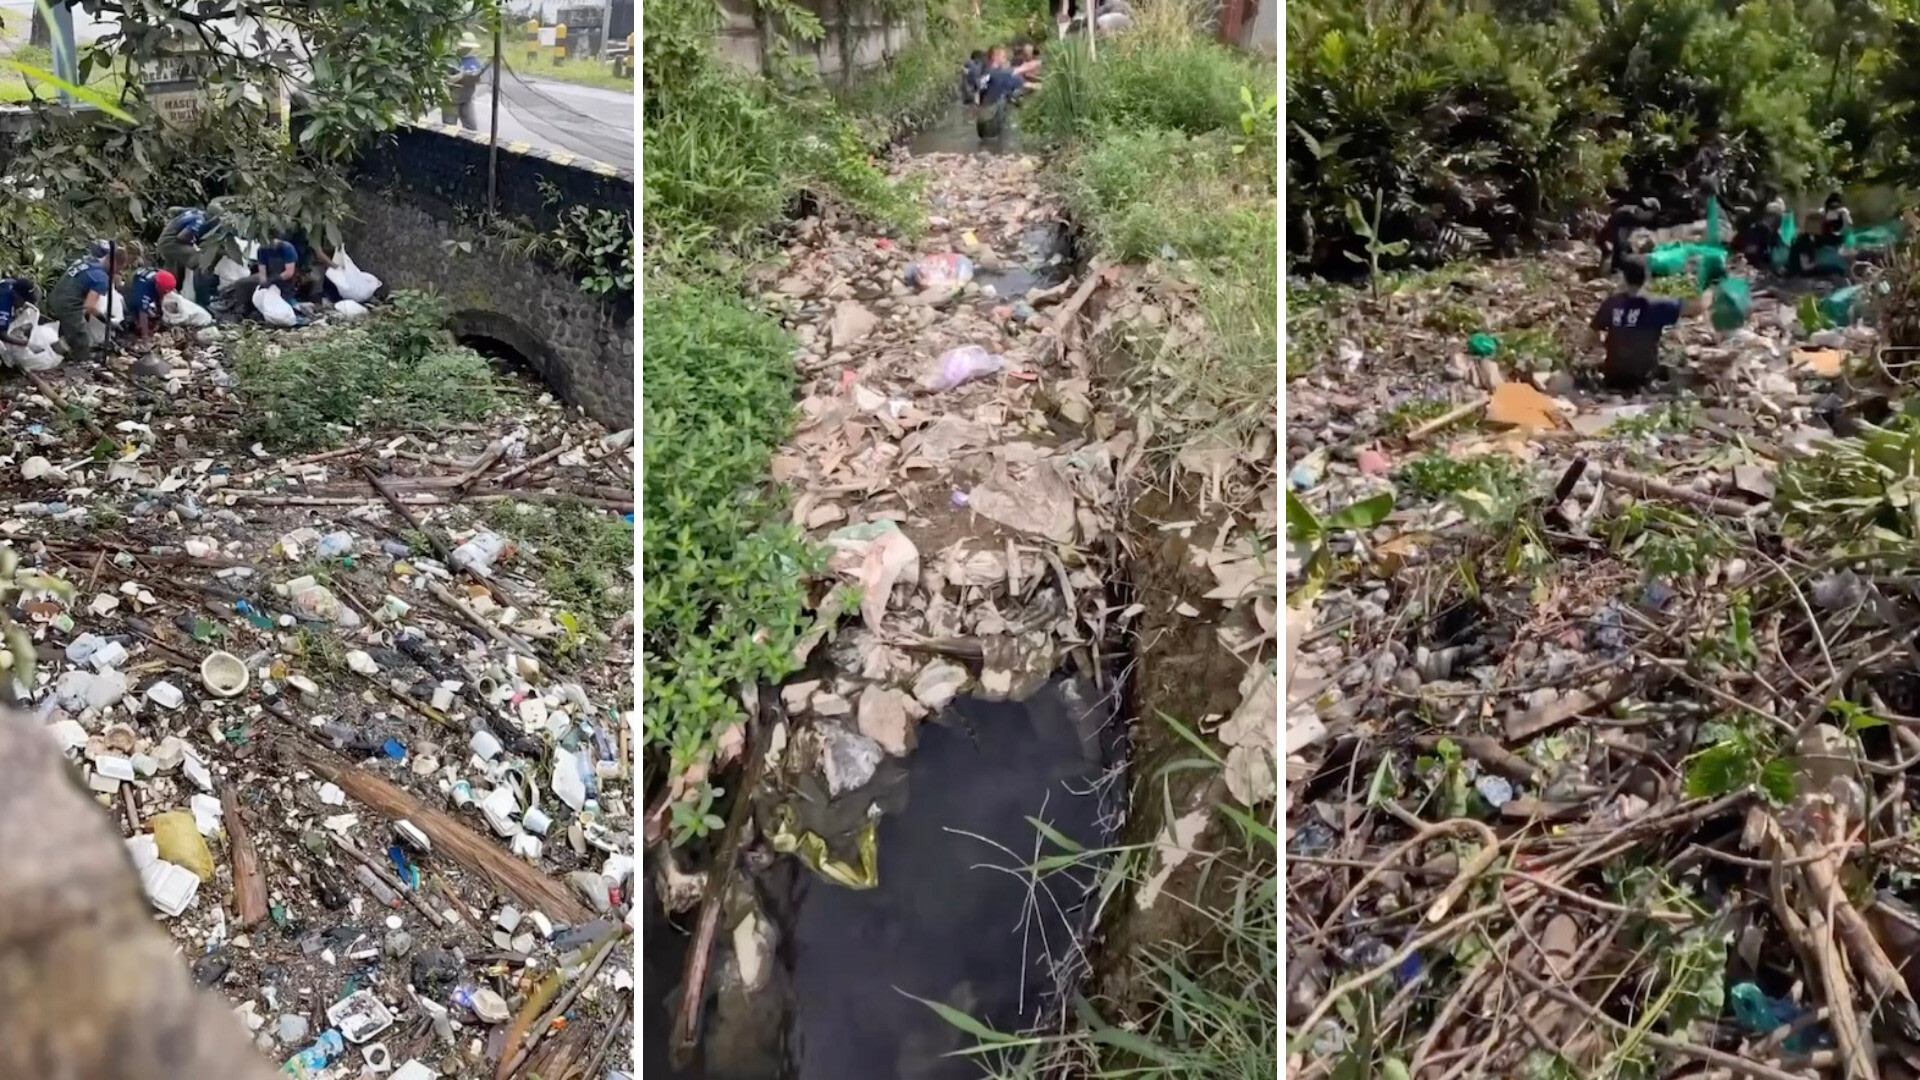 Timelapse of river cleanup project shows jaw-dropping results: &#039;You are doing something meaningful&#039;